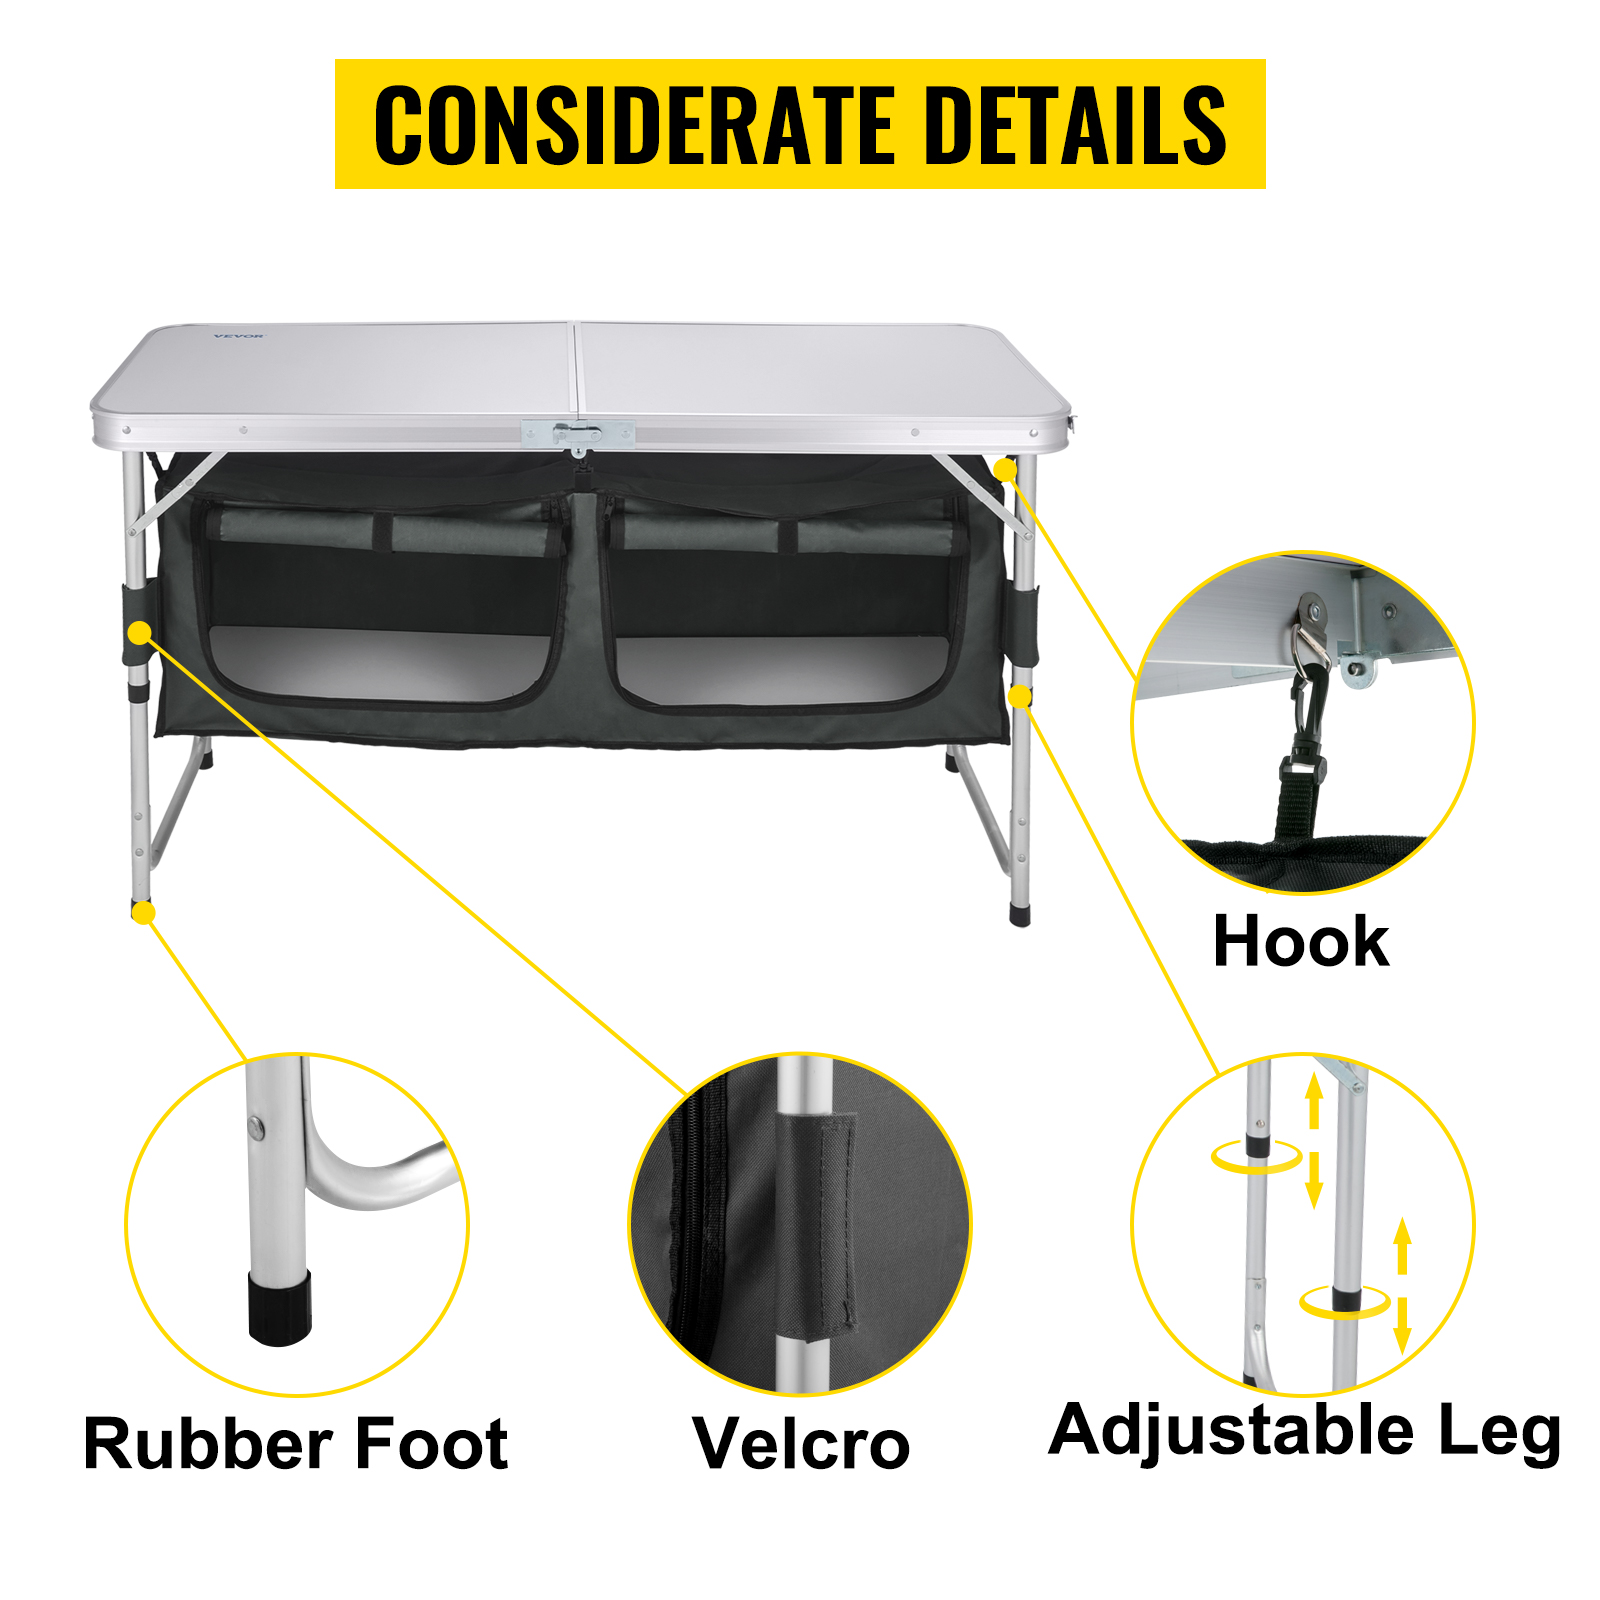 VEVOR Outdoor Mobile Kitchen, Portable Multifunctional Camping Kitchen  station, All in One Integrated Folding Cooking Box with Windproof Stove,  Folding Tables Storage Organizer for Beach BBQ Picnic 